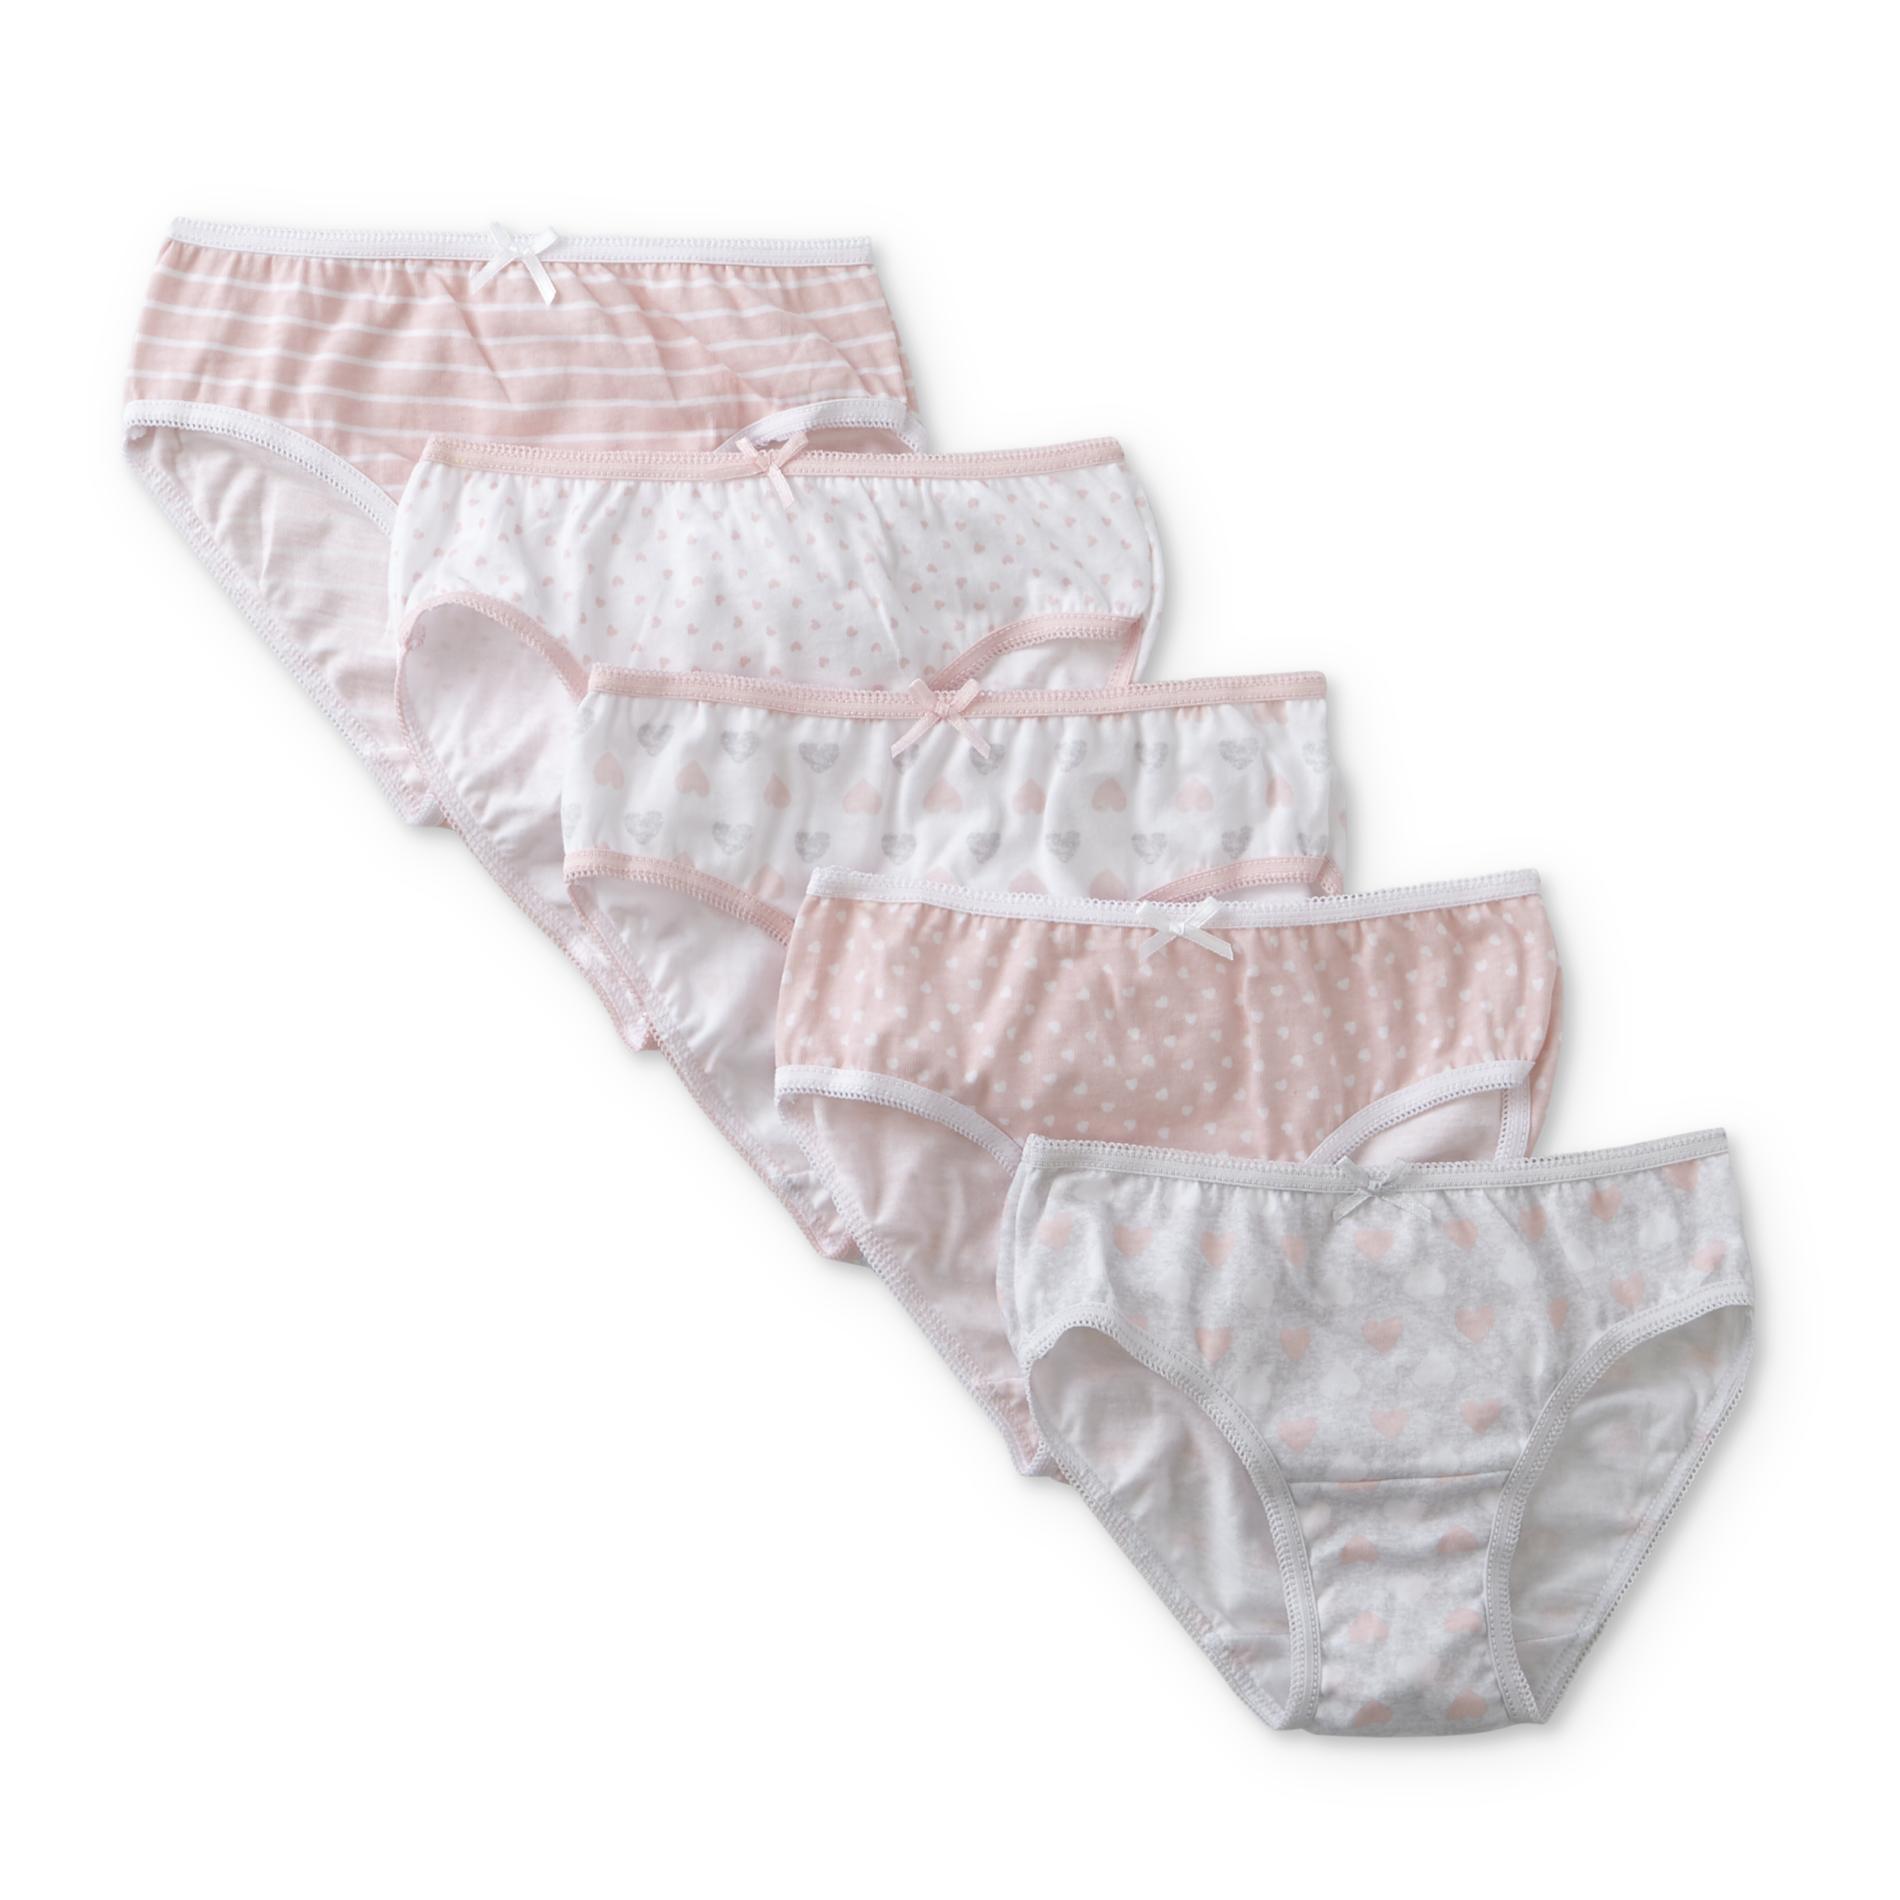 Toddler Girls' 5-Pack Brief Panties - Hearts/Striped